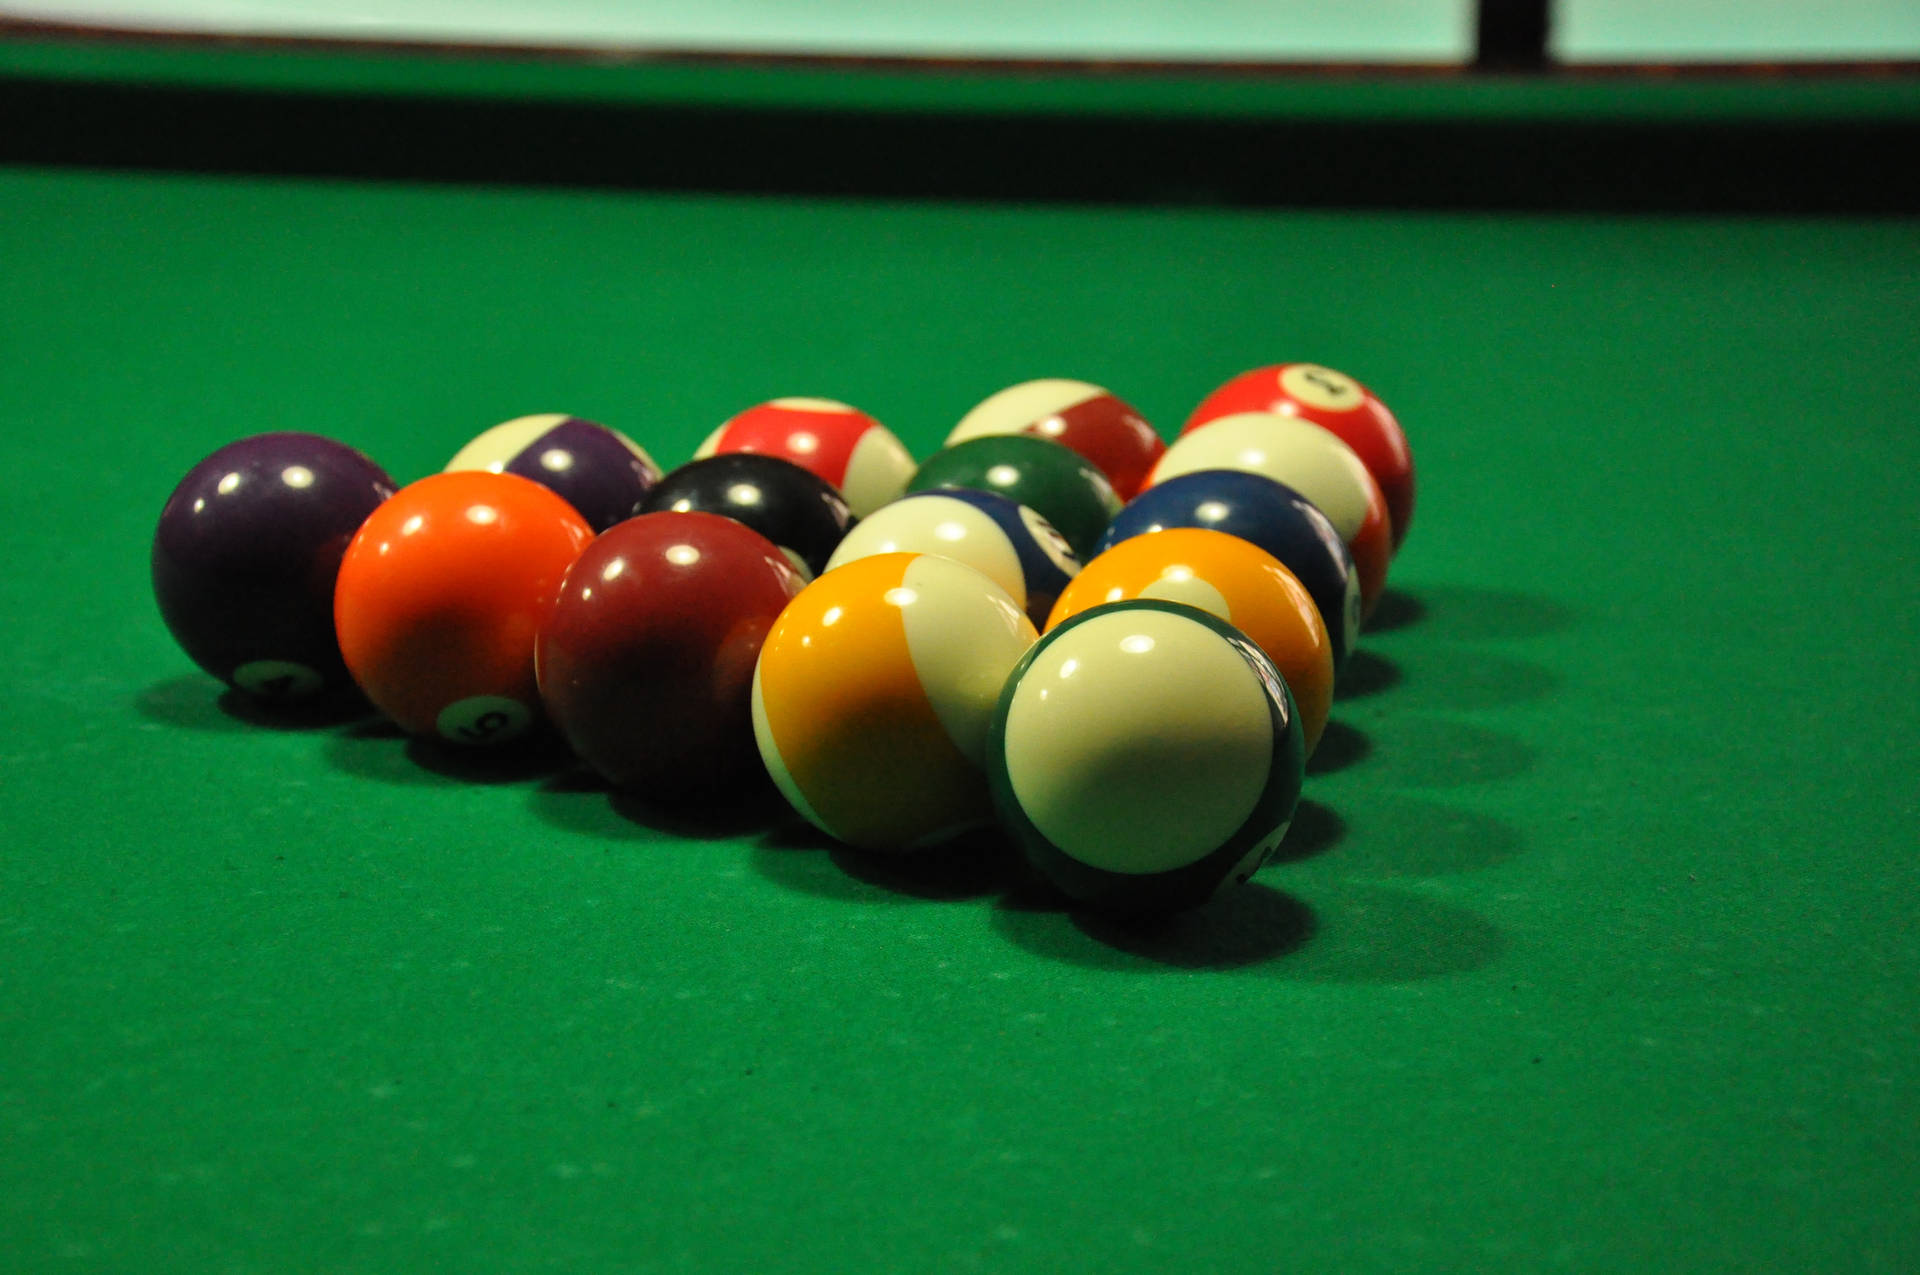 Captivating Shot of Billiard Balls in Triangle on the Pool Table Wallpaper